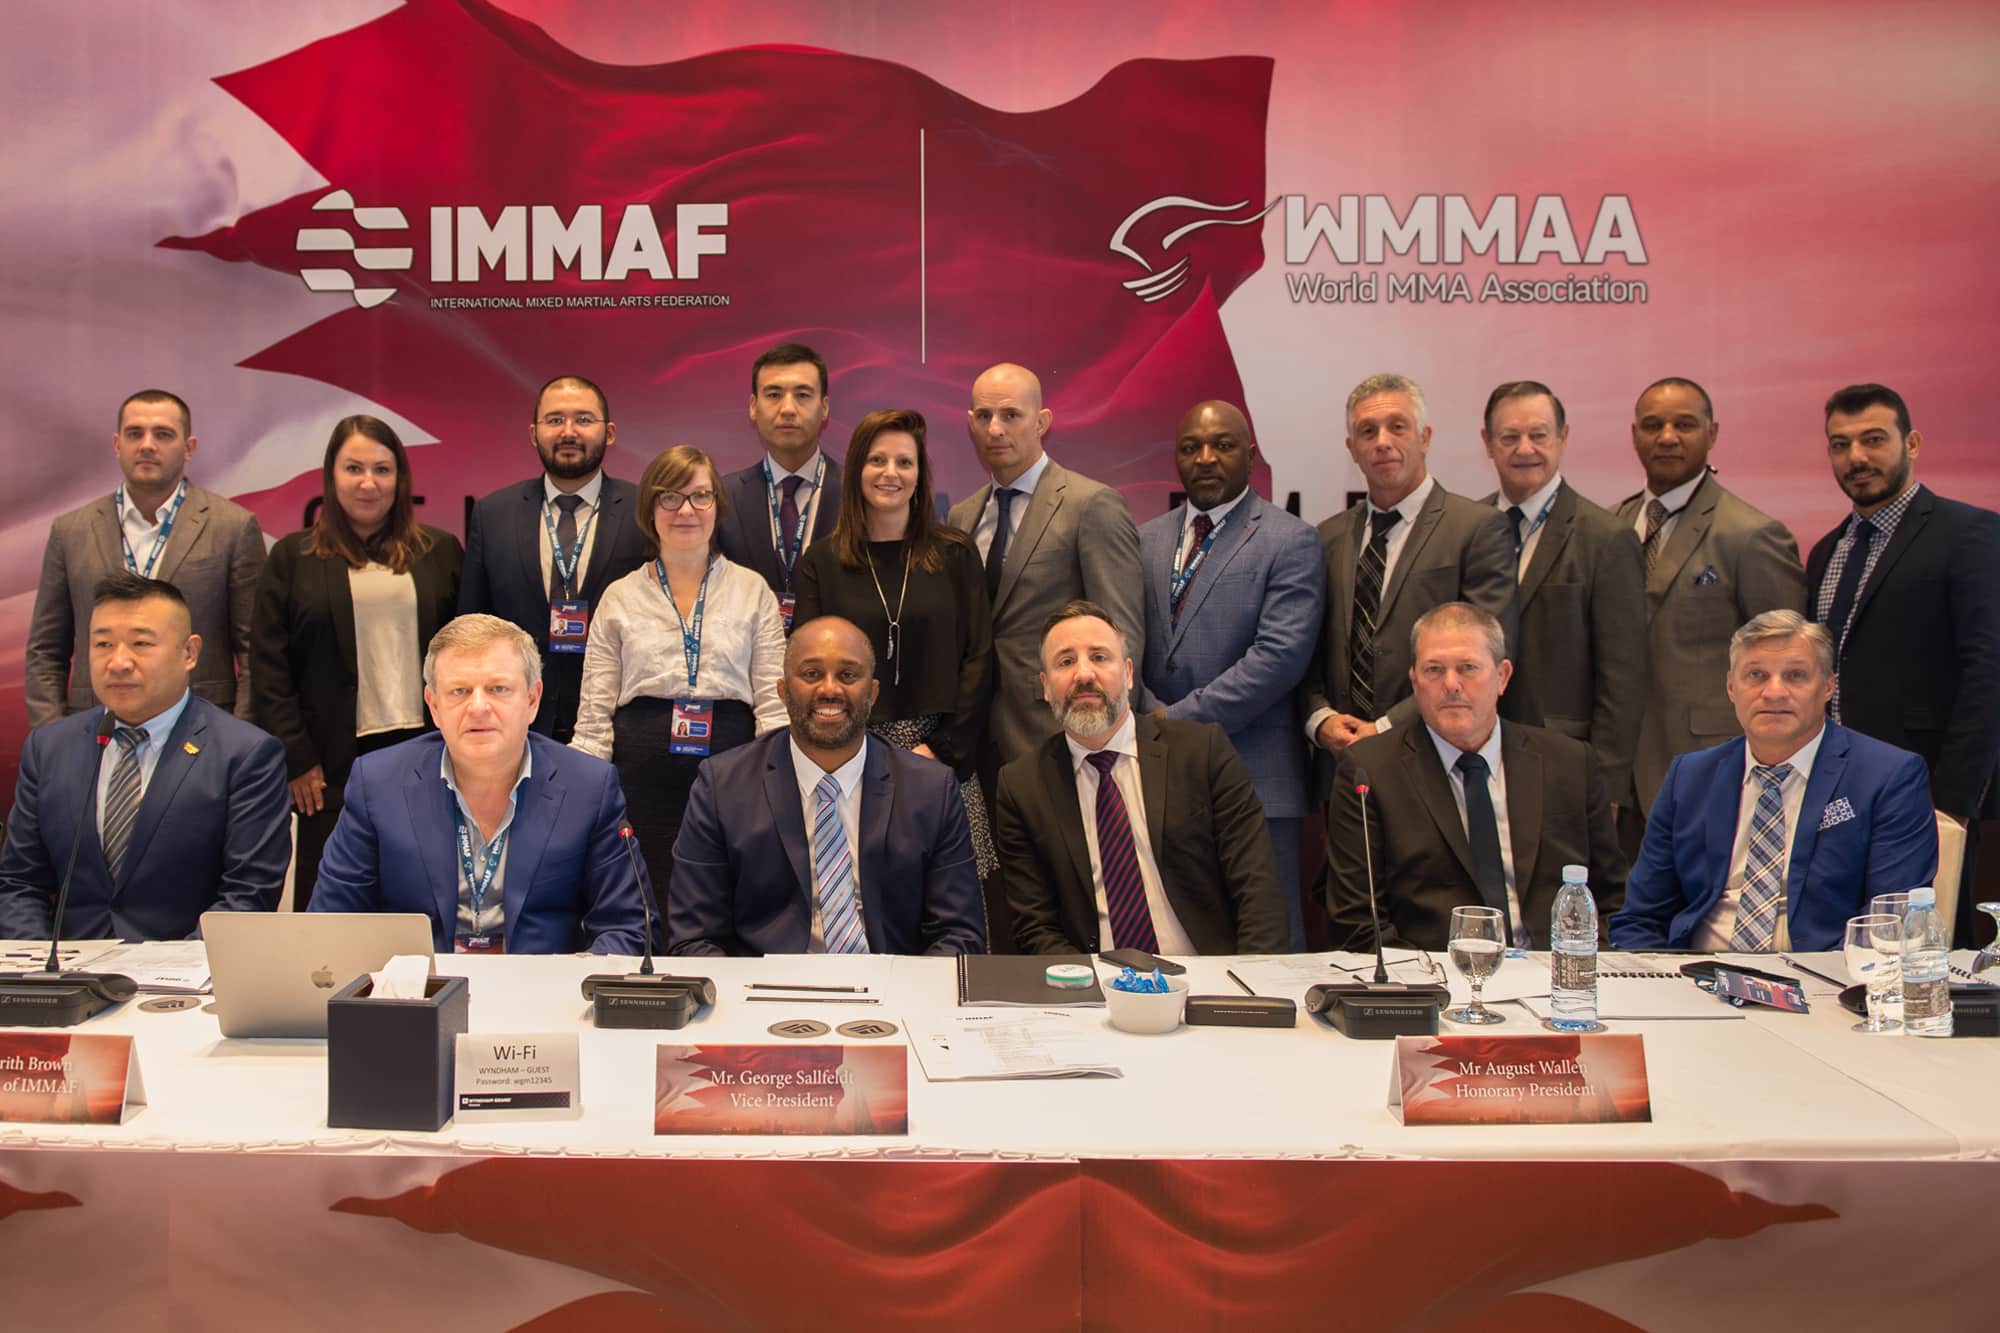 IMMAF board to participate in good governance training